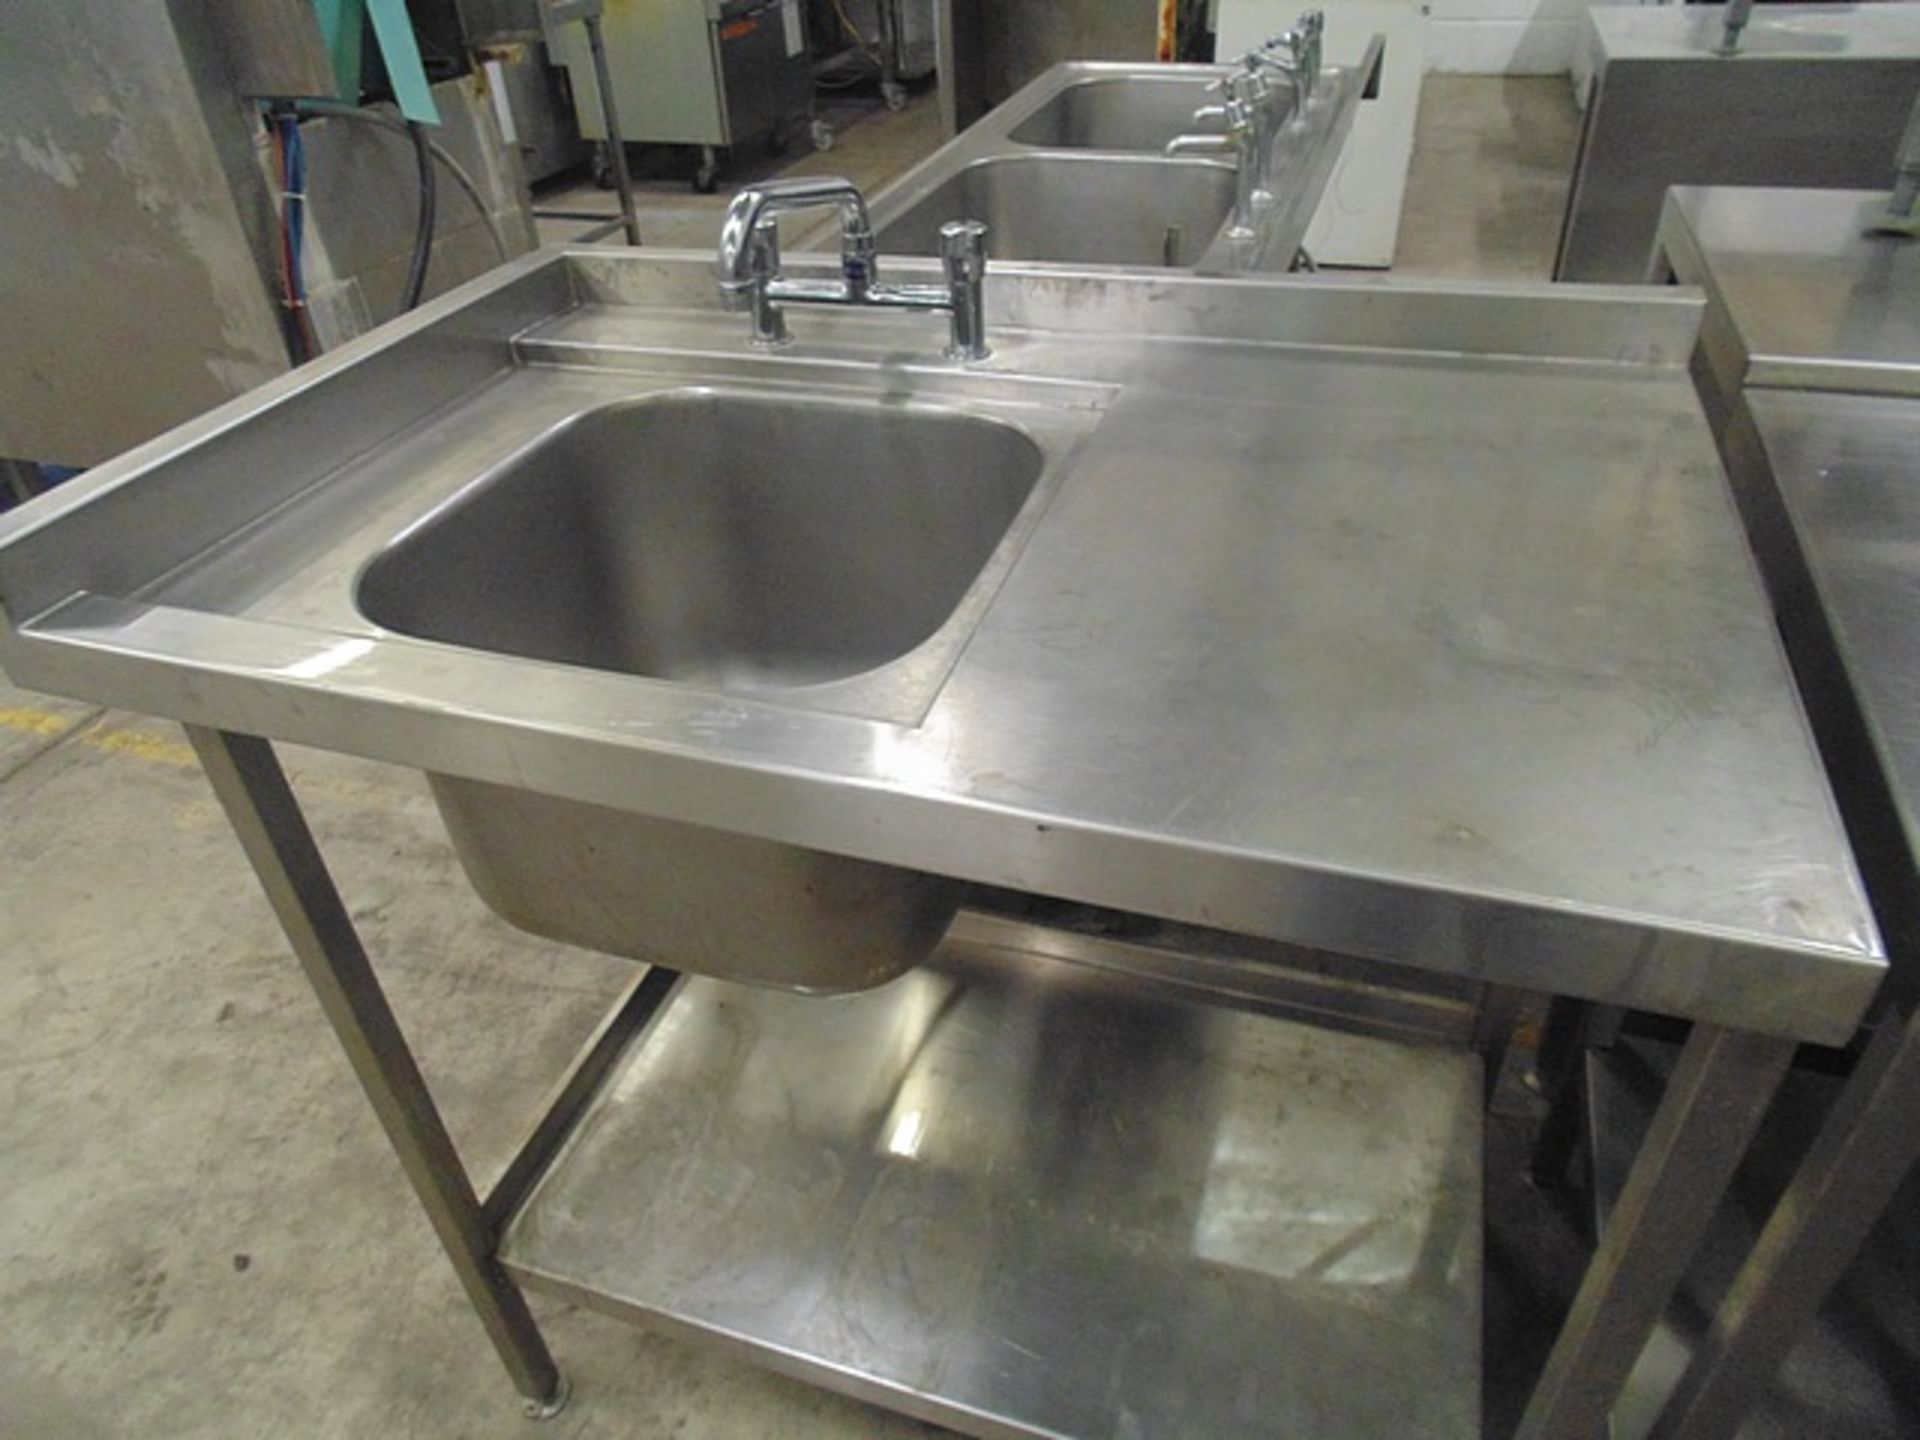 Stainless steel commercial sink RHD 1000mm x 650mm x 900mm - Image 2 of 2